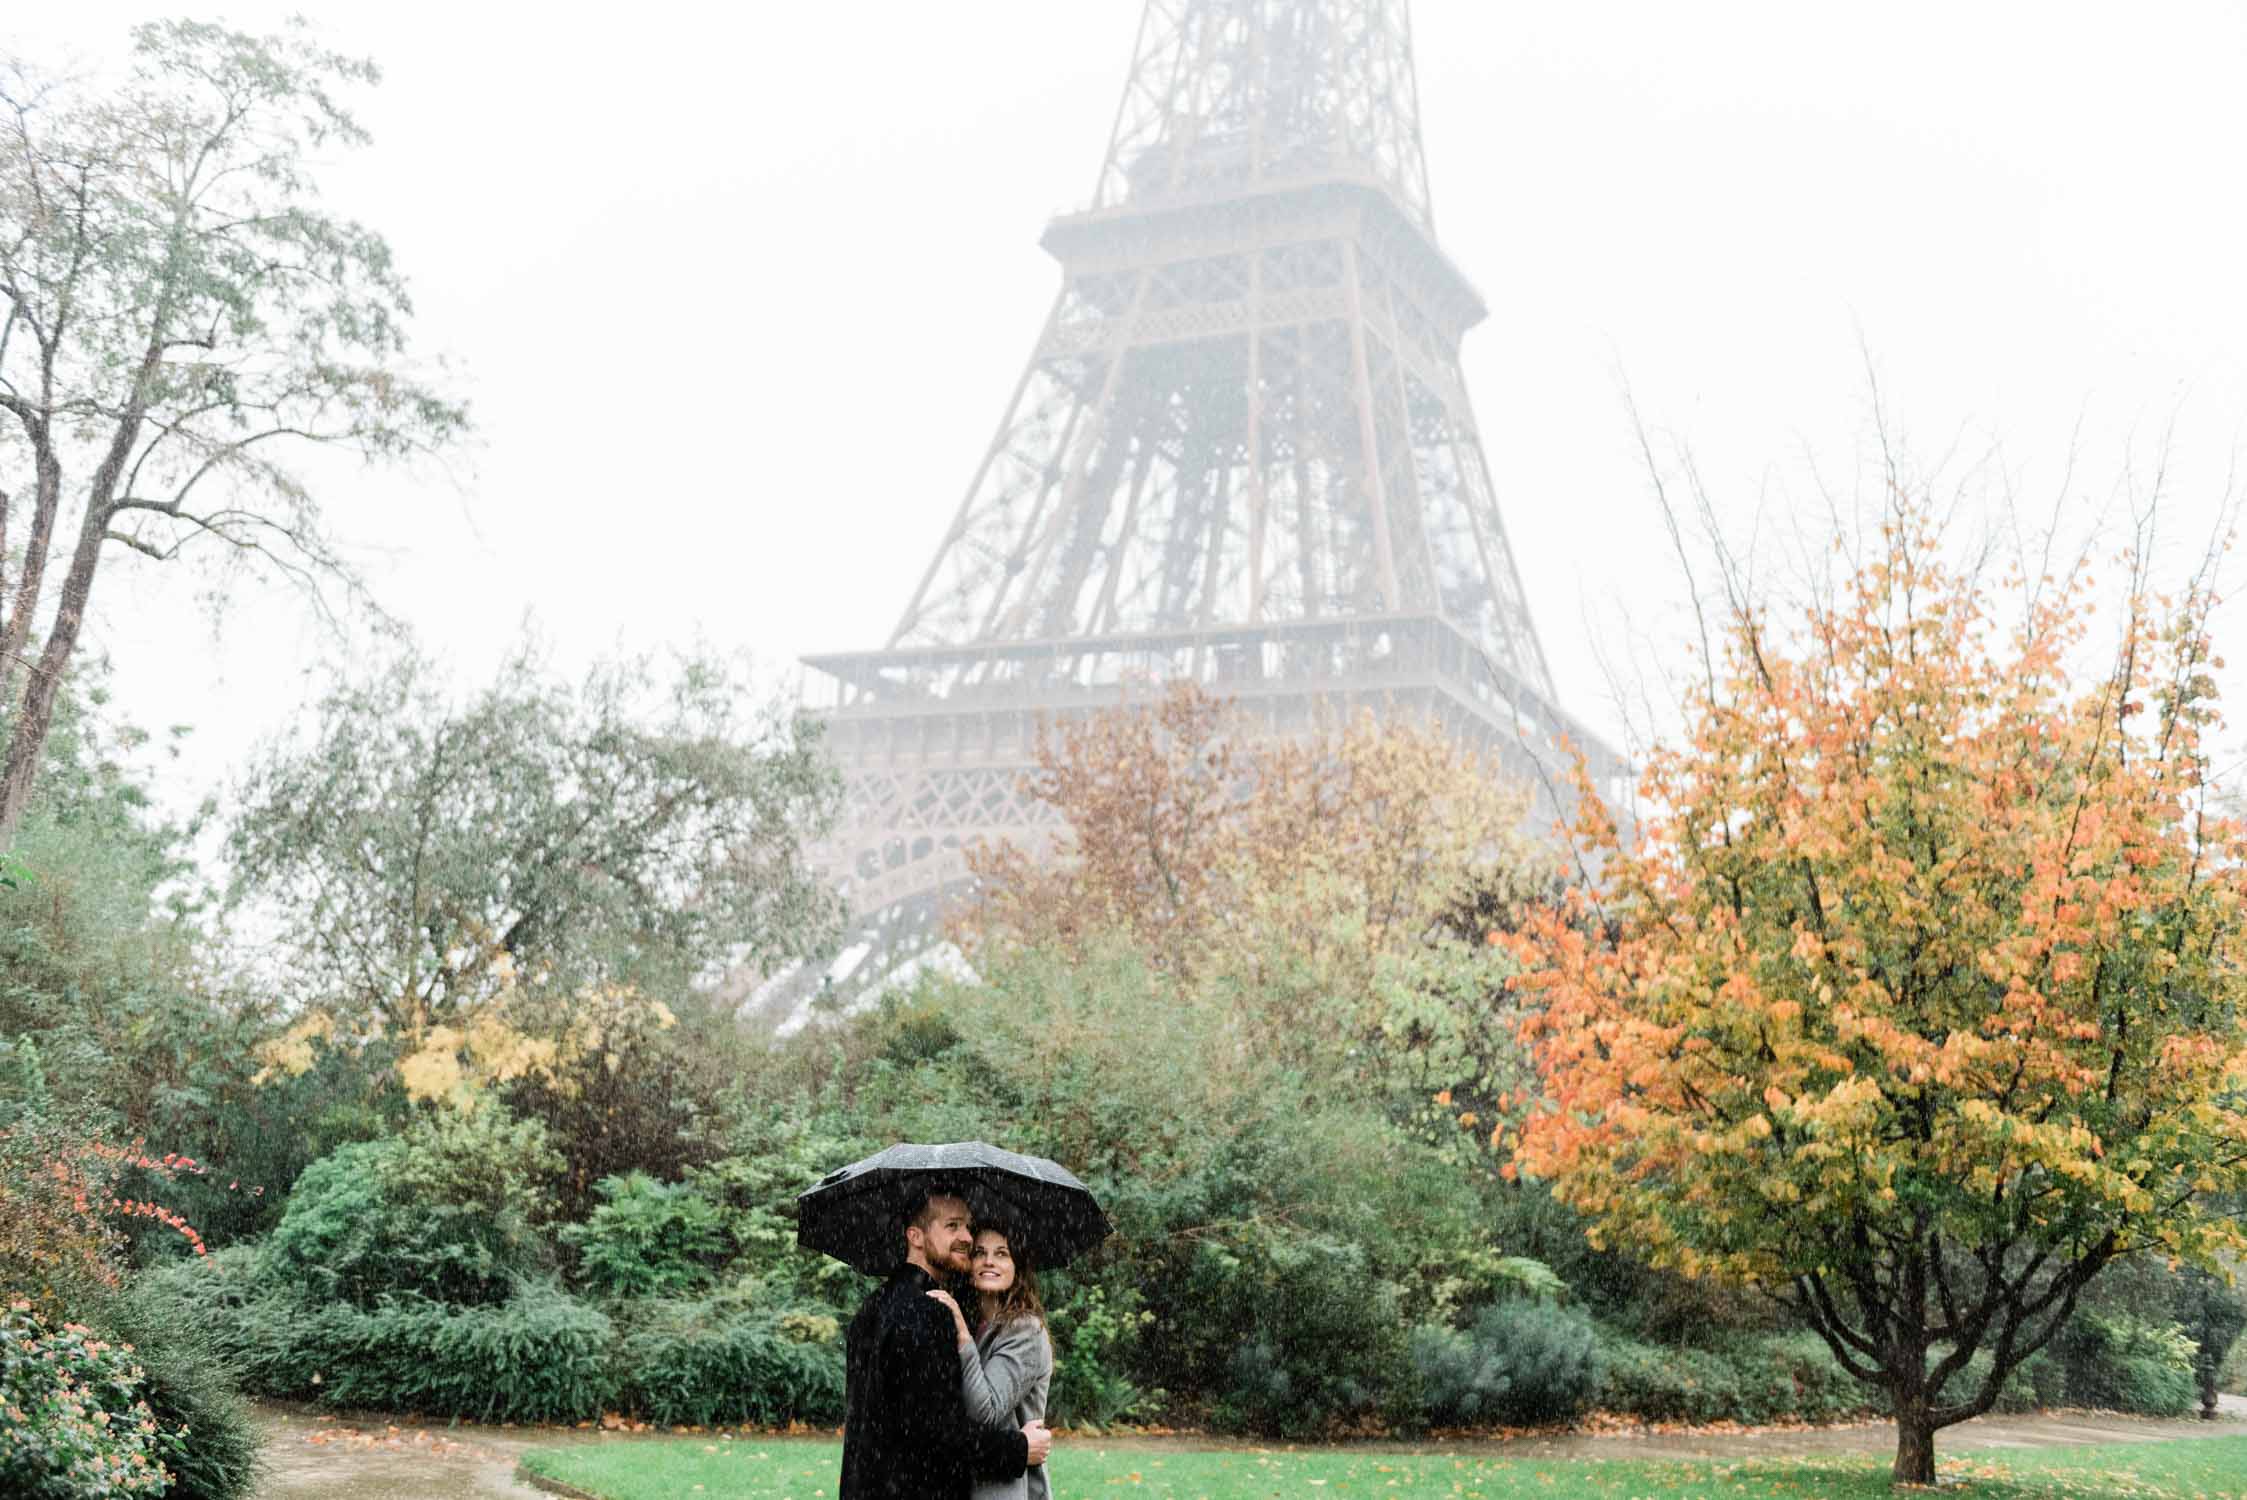 Newly engaged couple in front of the Eiffel tower and fall foliage